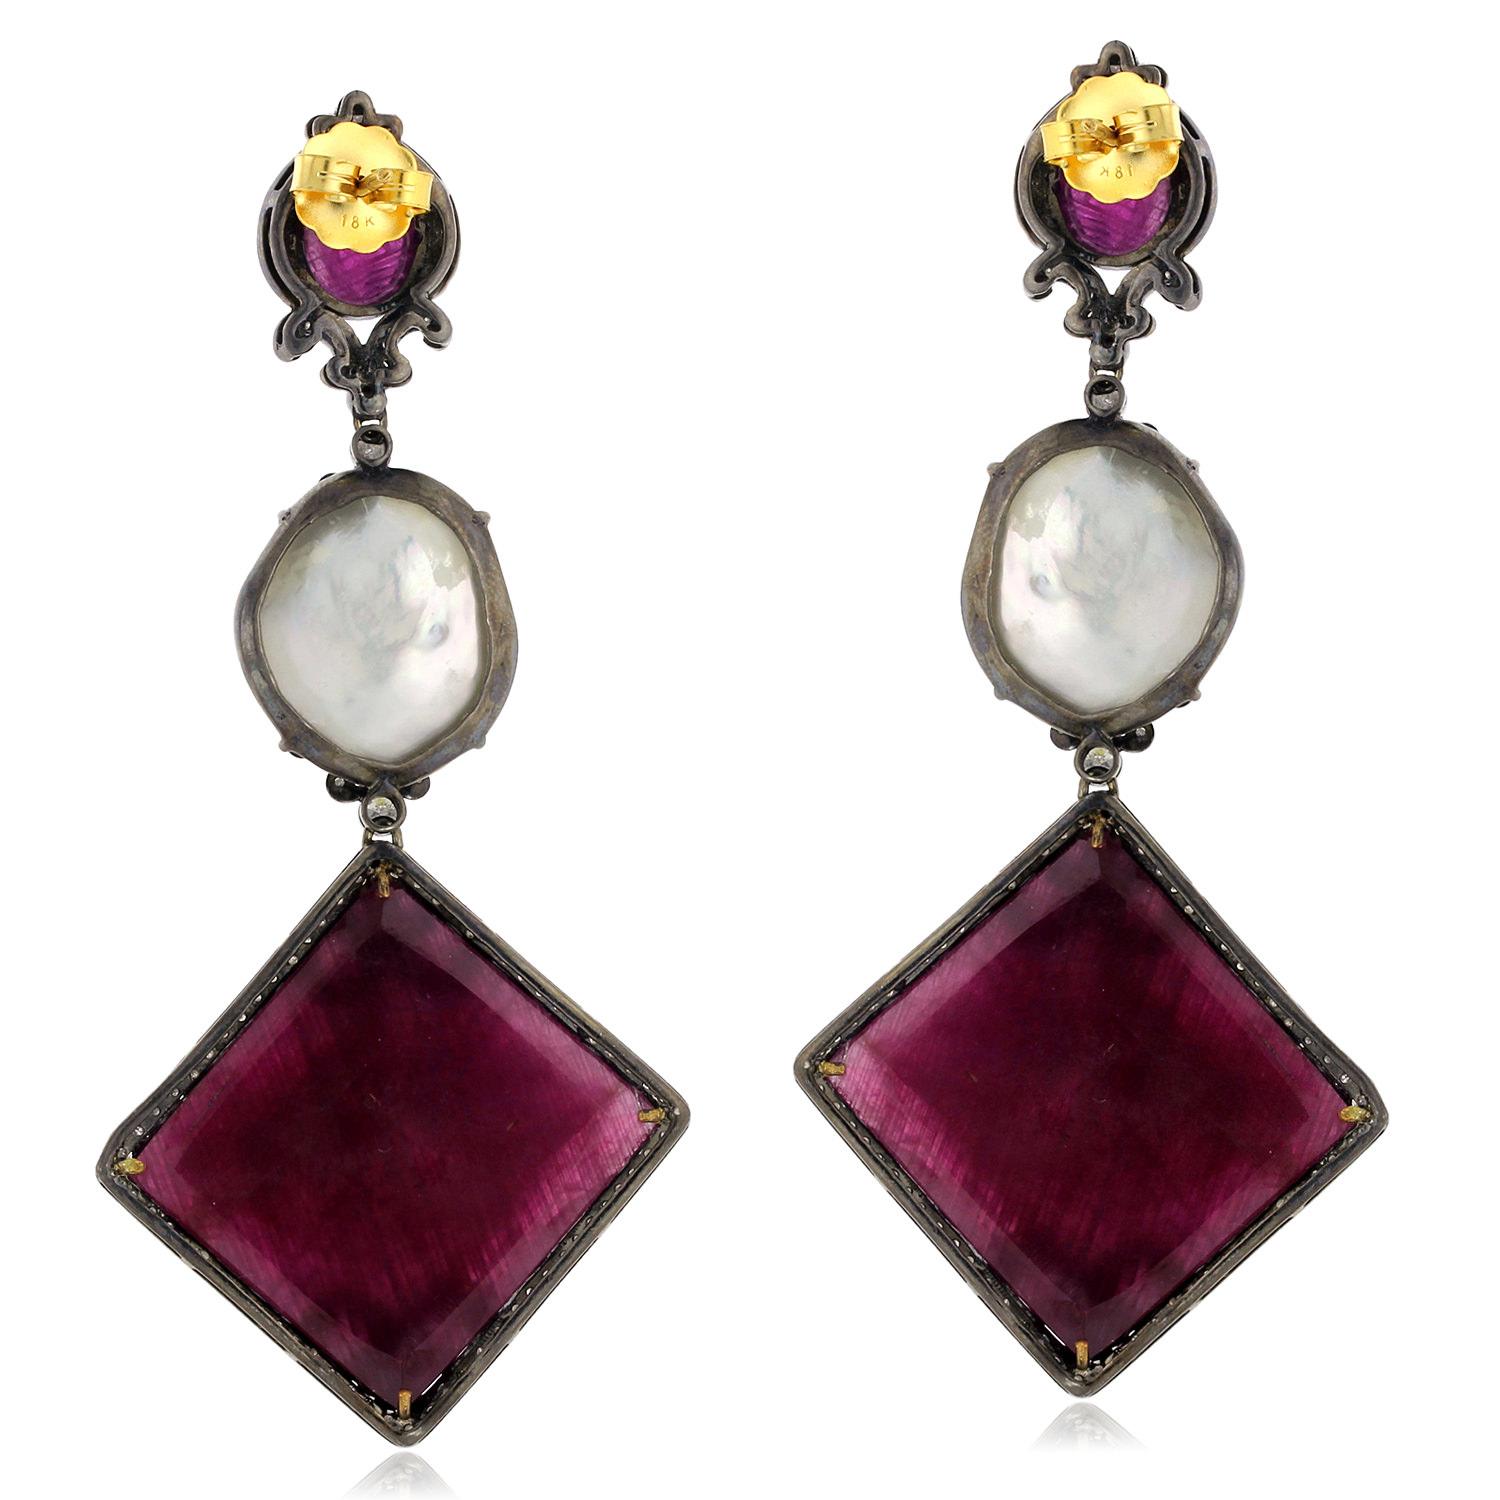 These breathtaking cushion-shaped ruby earrings are a true showstopper. The rich red rubies are the centerpiece of these earrings, and are connected to a lustrous pearl by a row of sparkling diamonds. The diamonds are encased in a delicate pave